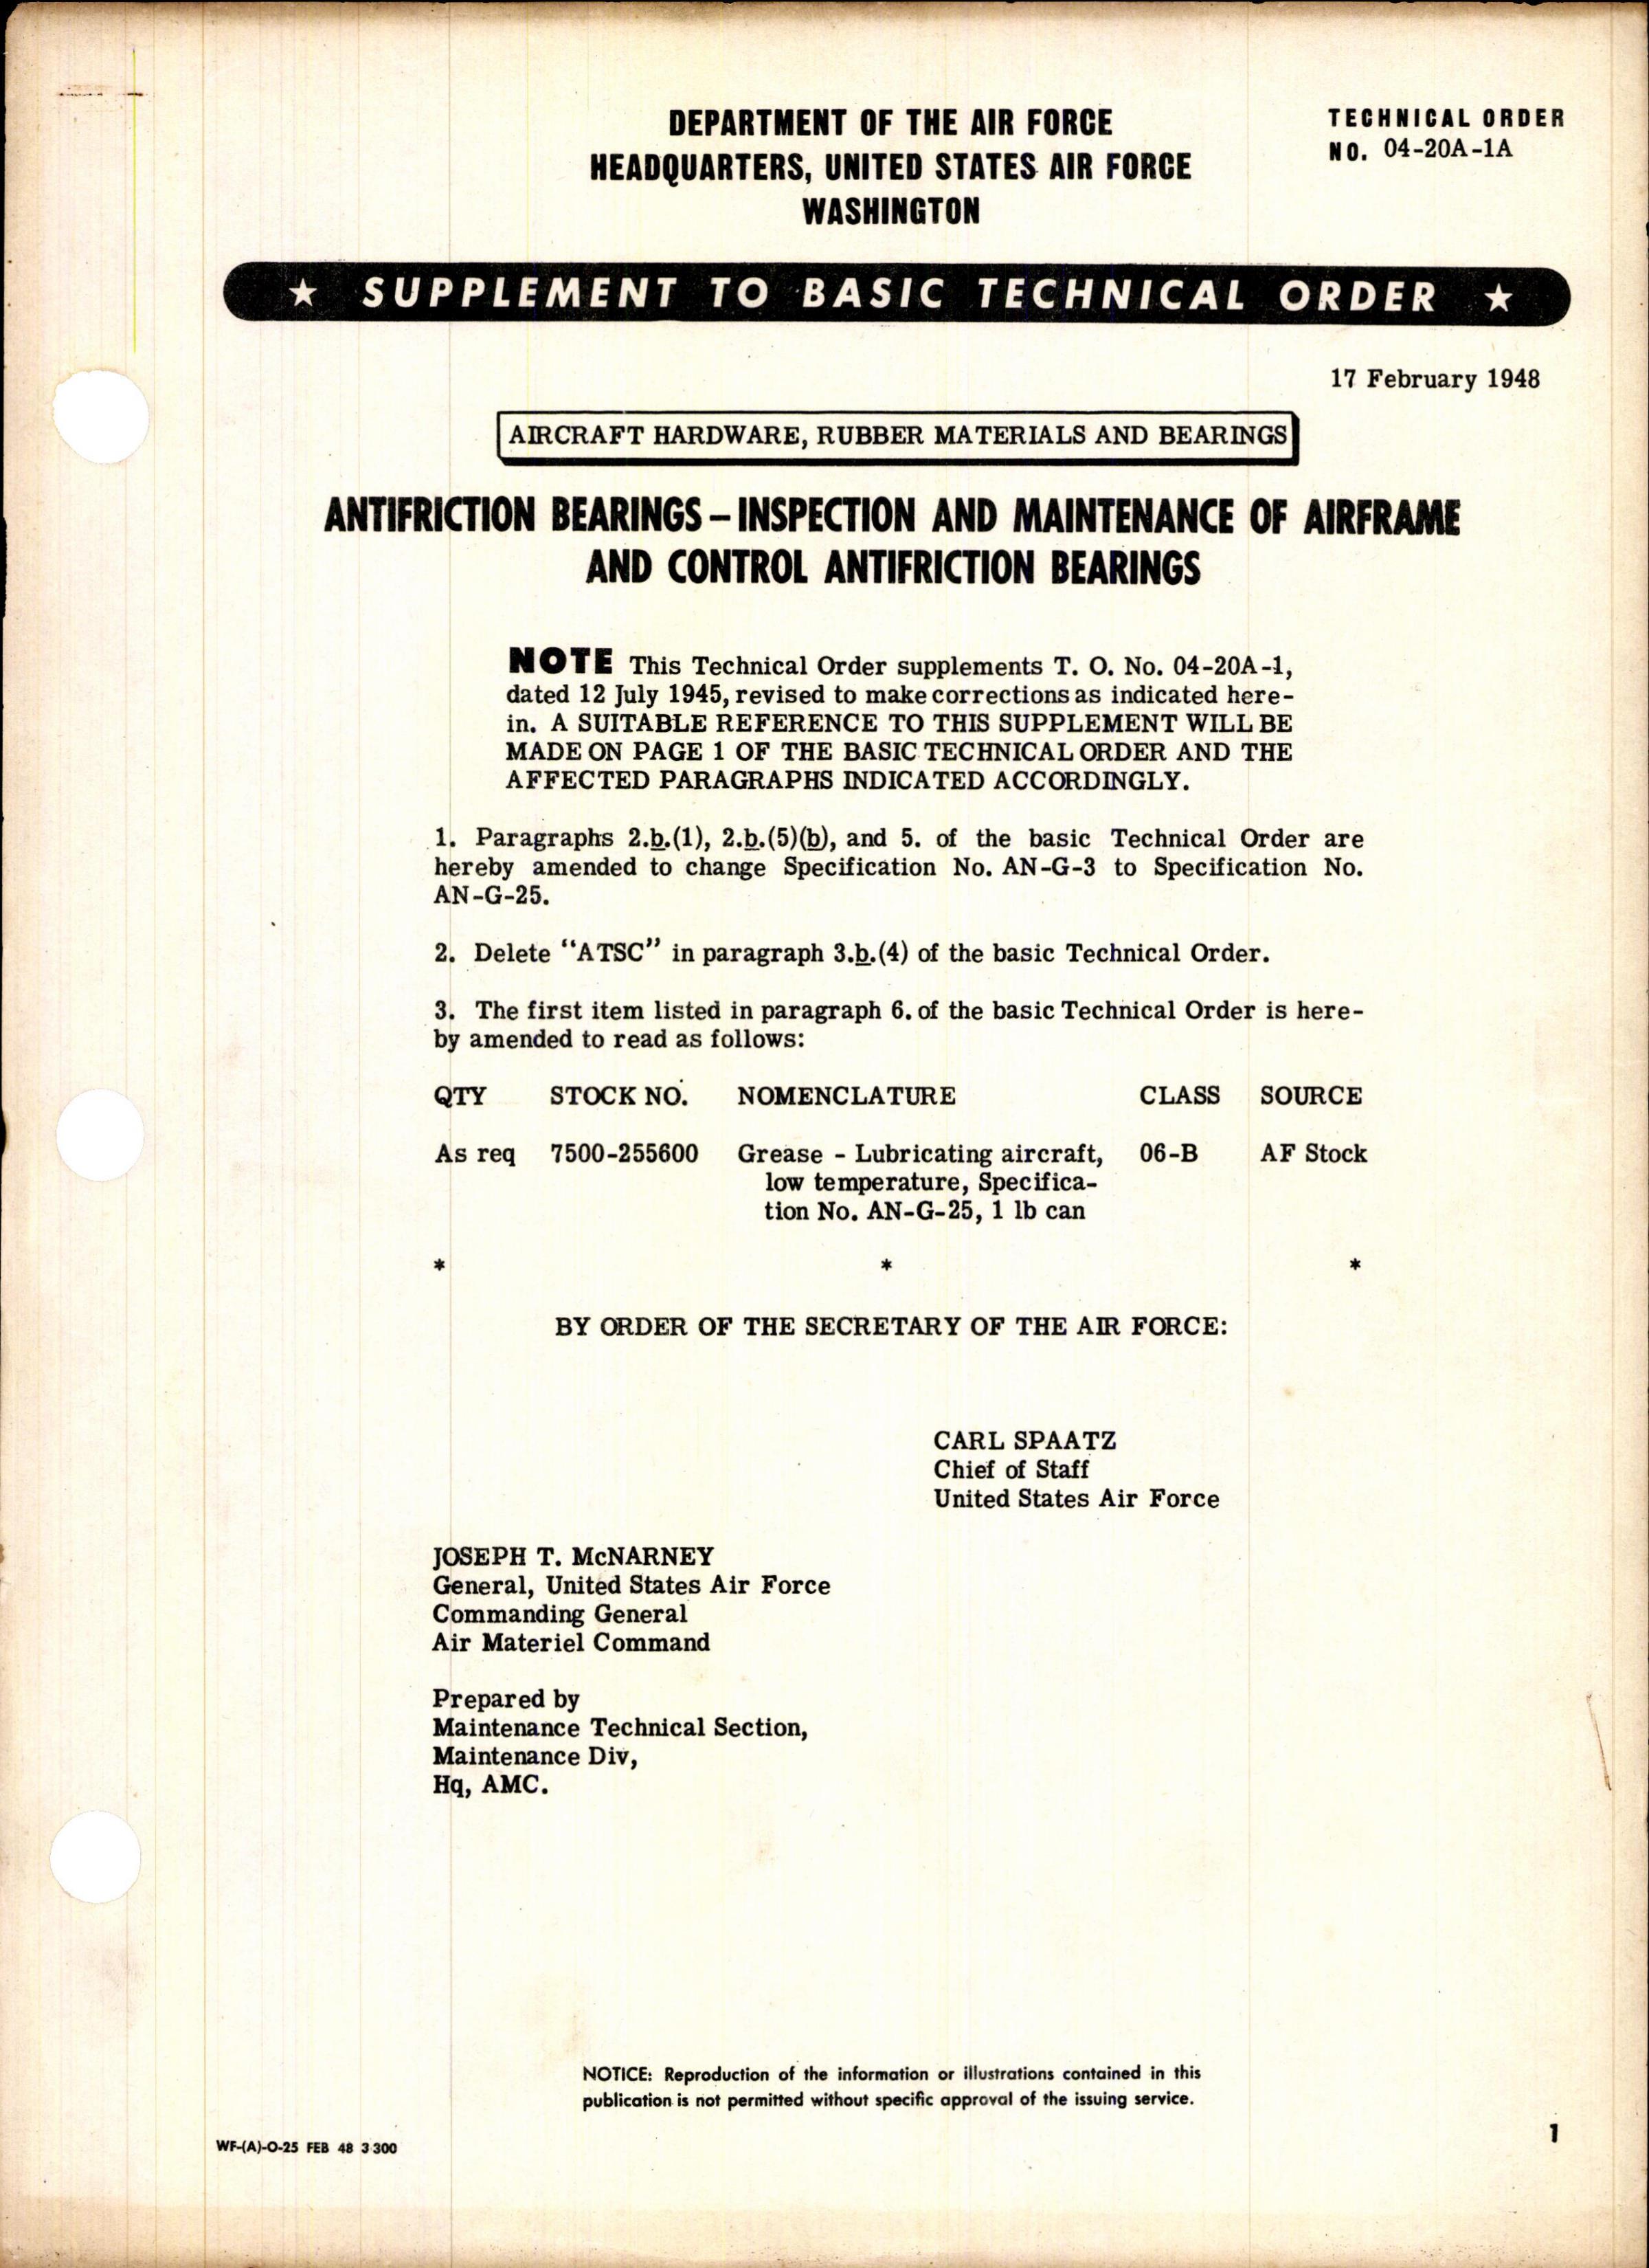 Sample page 1 from AirCorps Library document: Inspection and Maintenance of Airframe and Control Antifriction Bearings